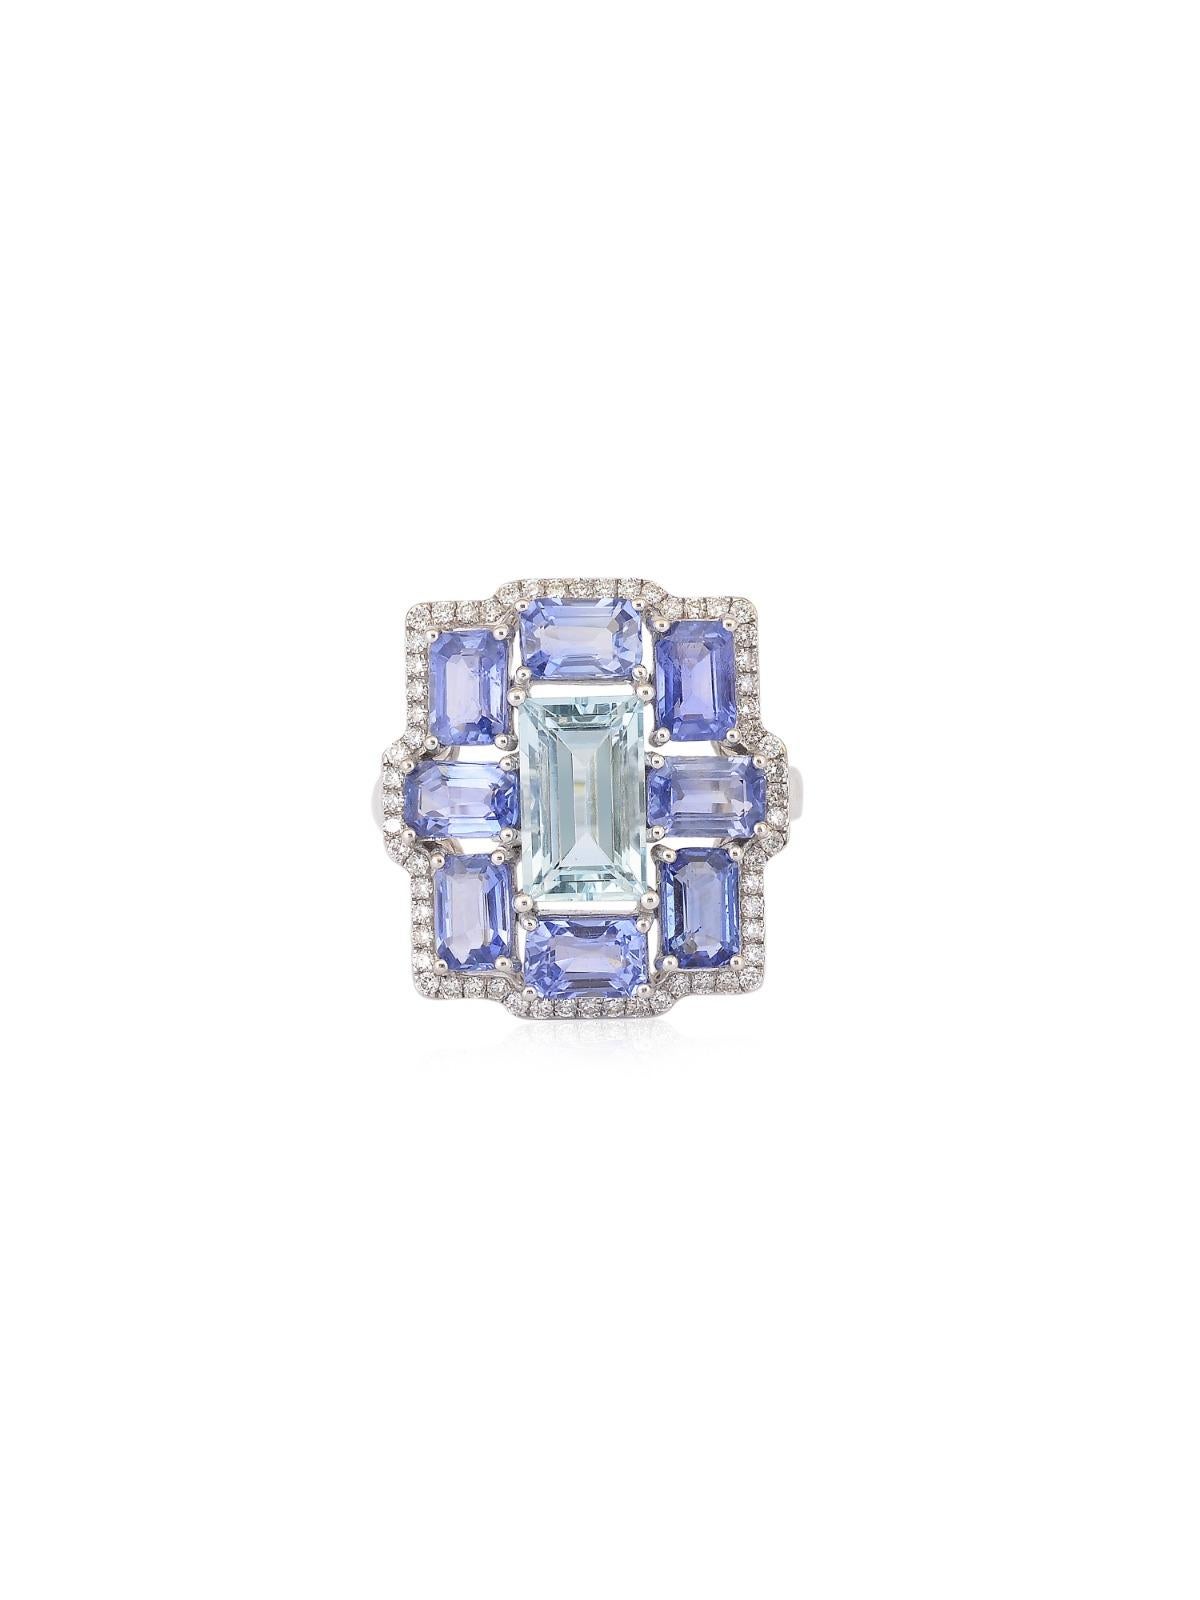 A beautiful cocktail ring with a fine Rectangular Aquamarine in the centre weighing 2.10 carats surrounded by Emerald cut Blue sapphires. 
The combination of the 2 colors makes the ring unique and eye catching at the same time.
A very versatile and